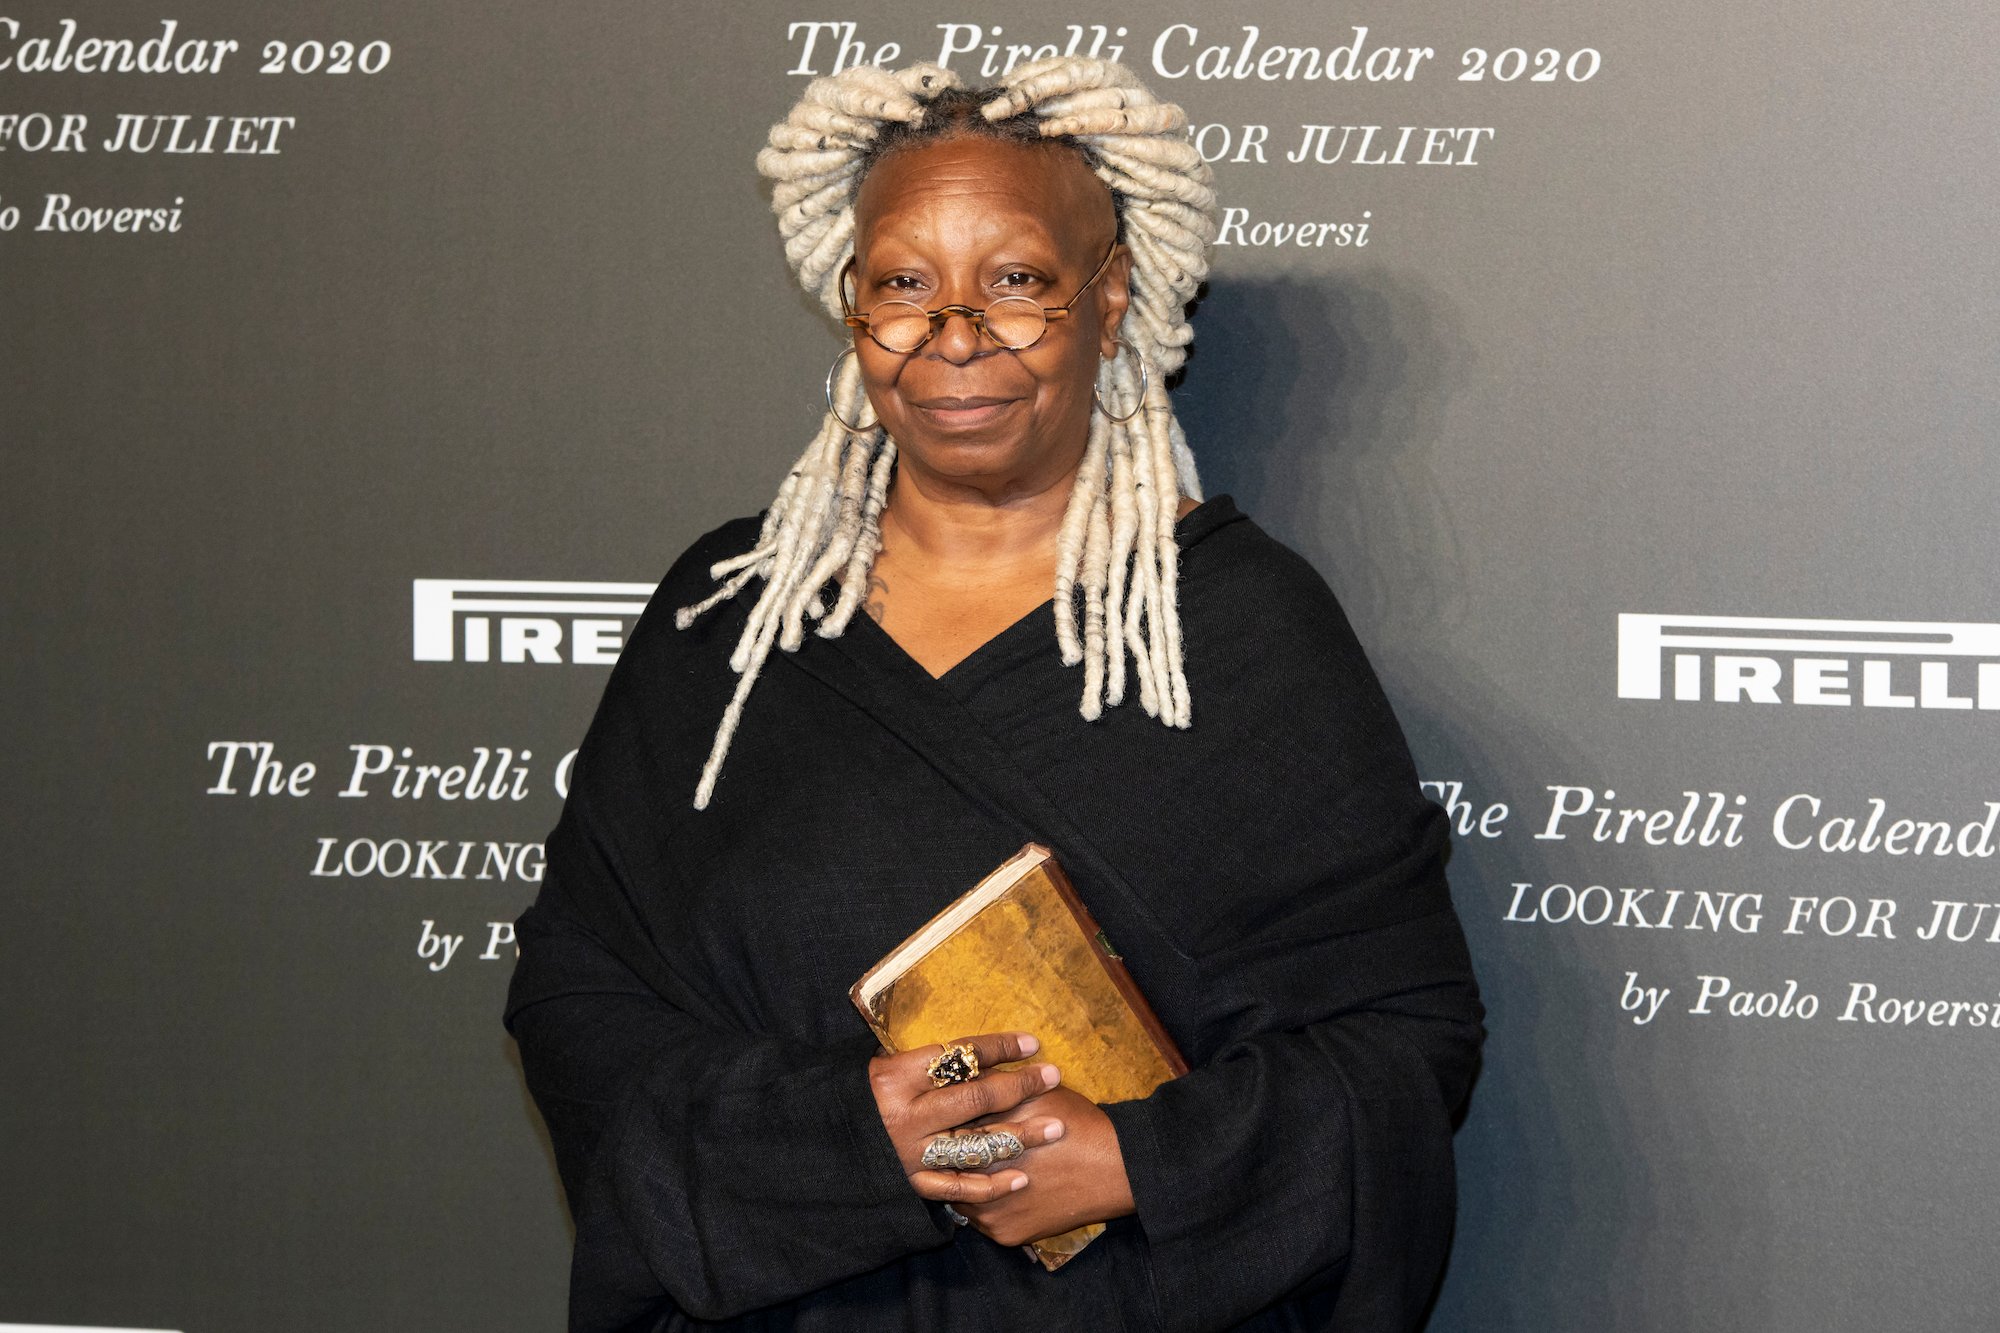 The View star Whoopi Goldberg smiling in front of a black background